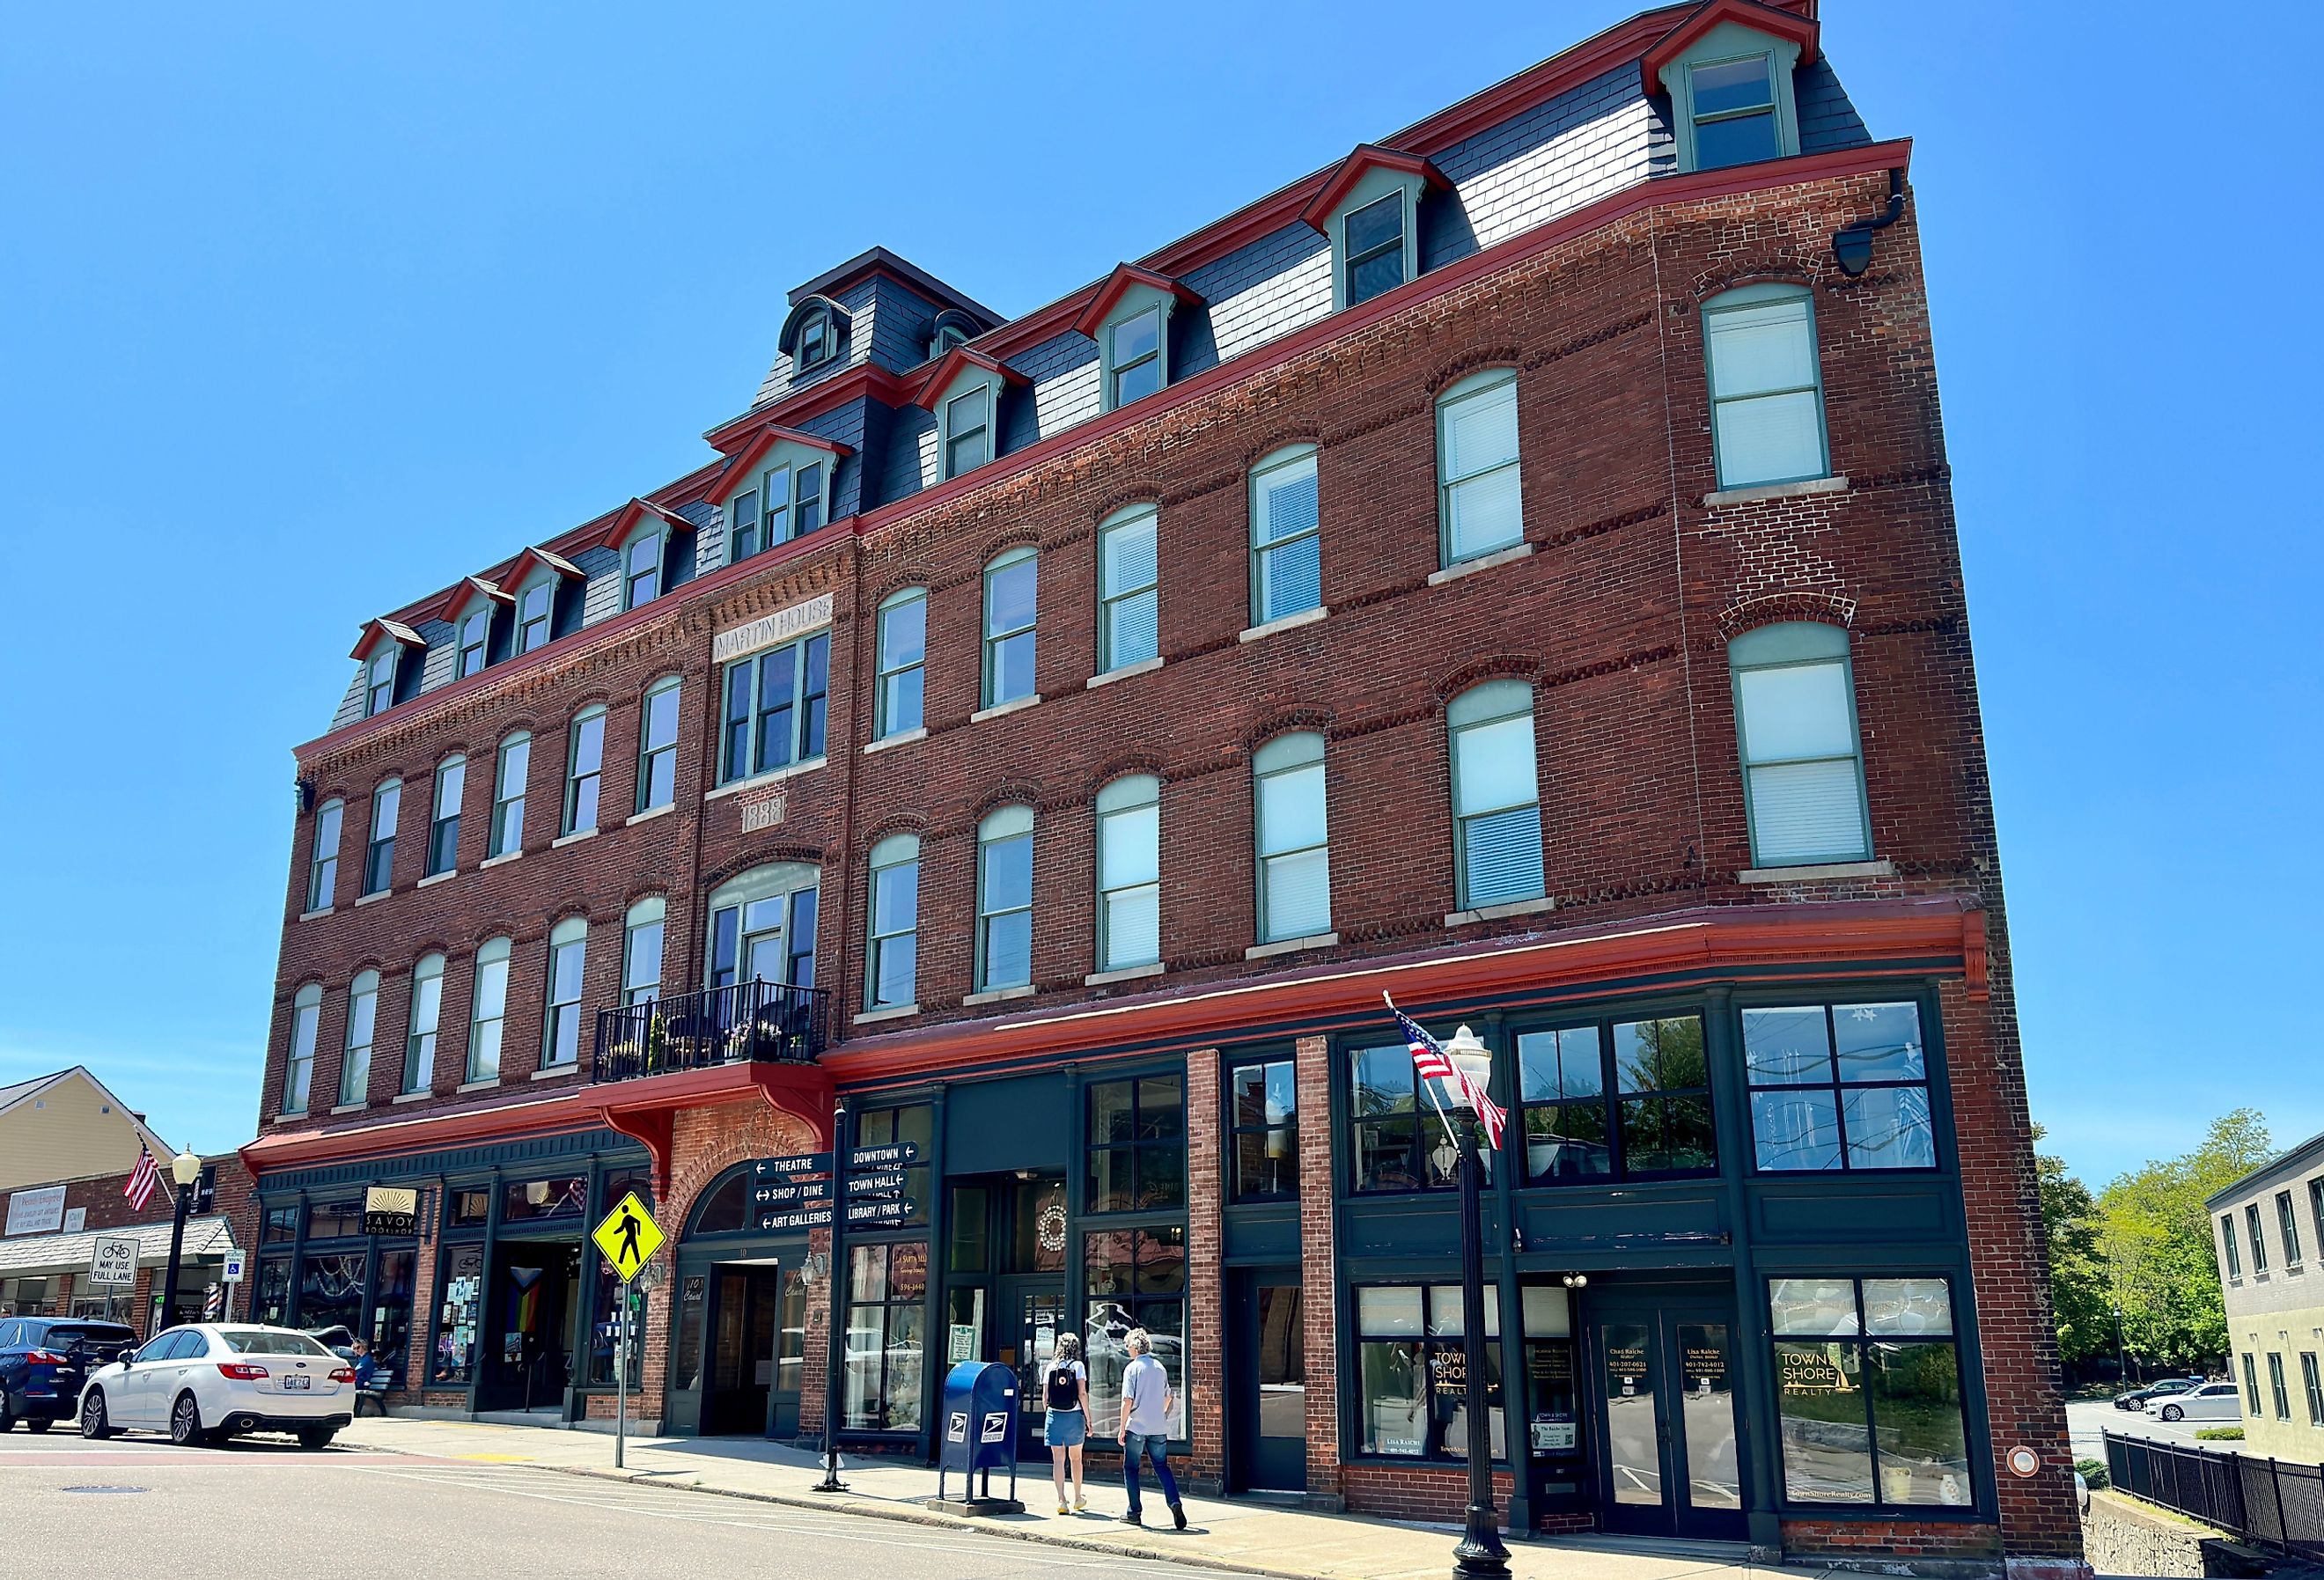 Streetscape of five-story, Martin House (former hotel) in historic, downtown, Westerly, Rhode Island.